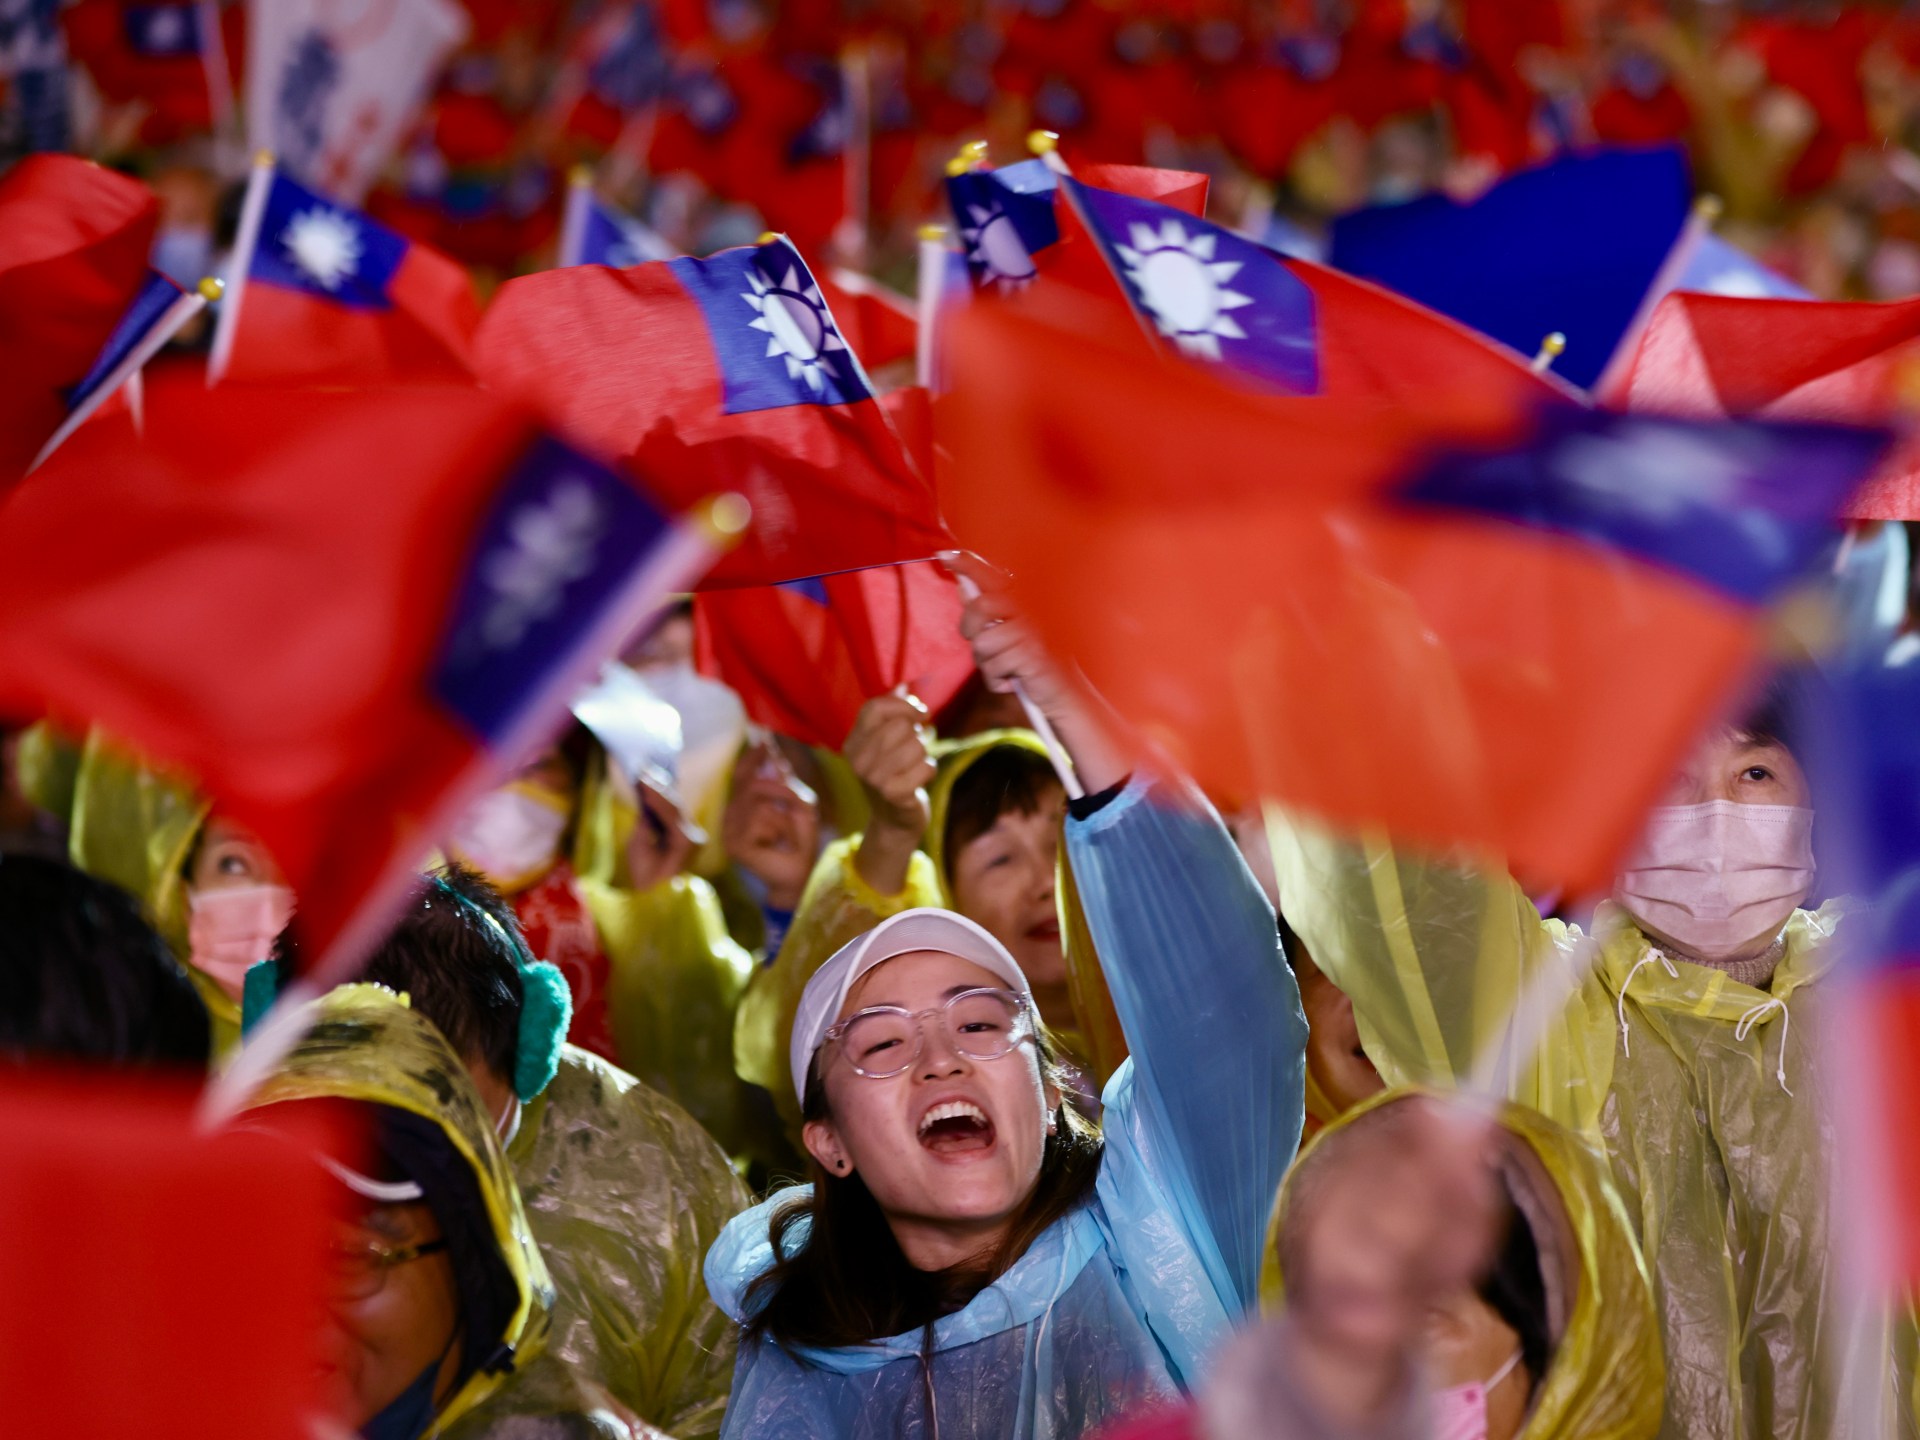 A poll with outsize importance: What to know about Taiwan’s election